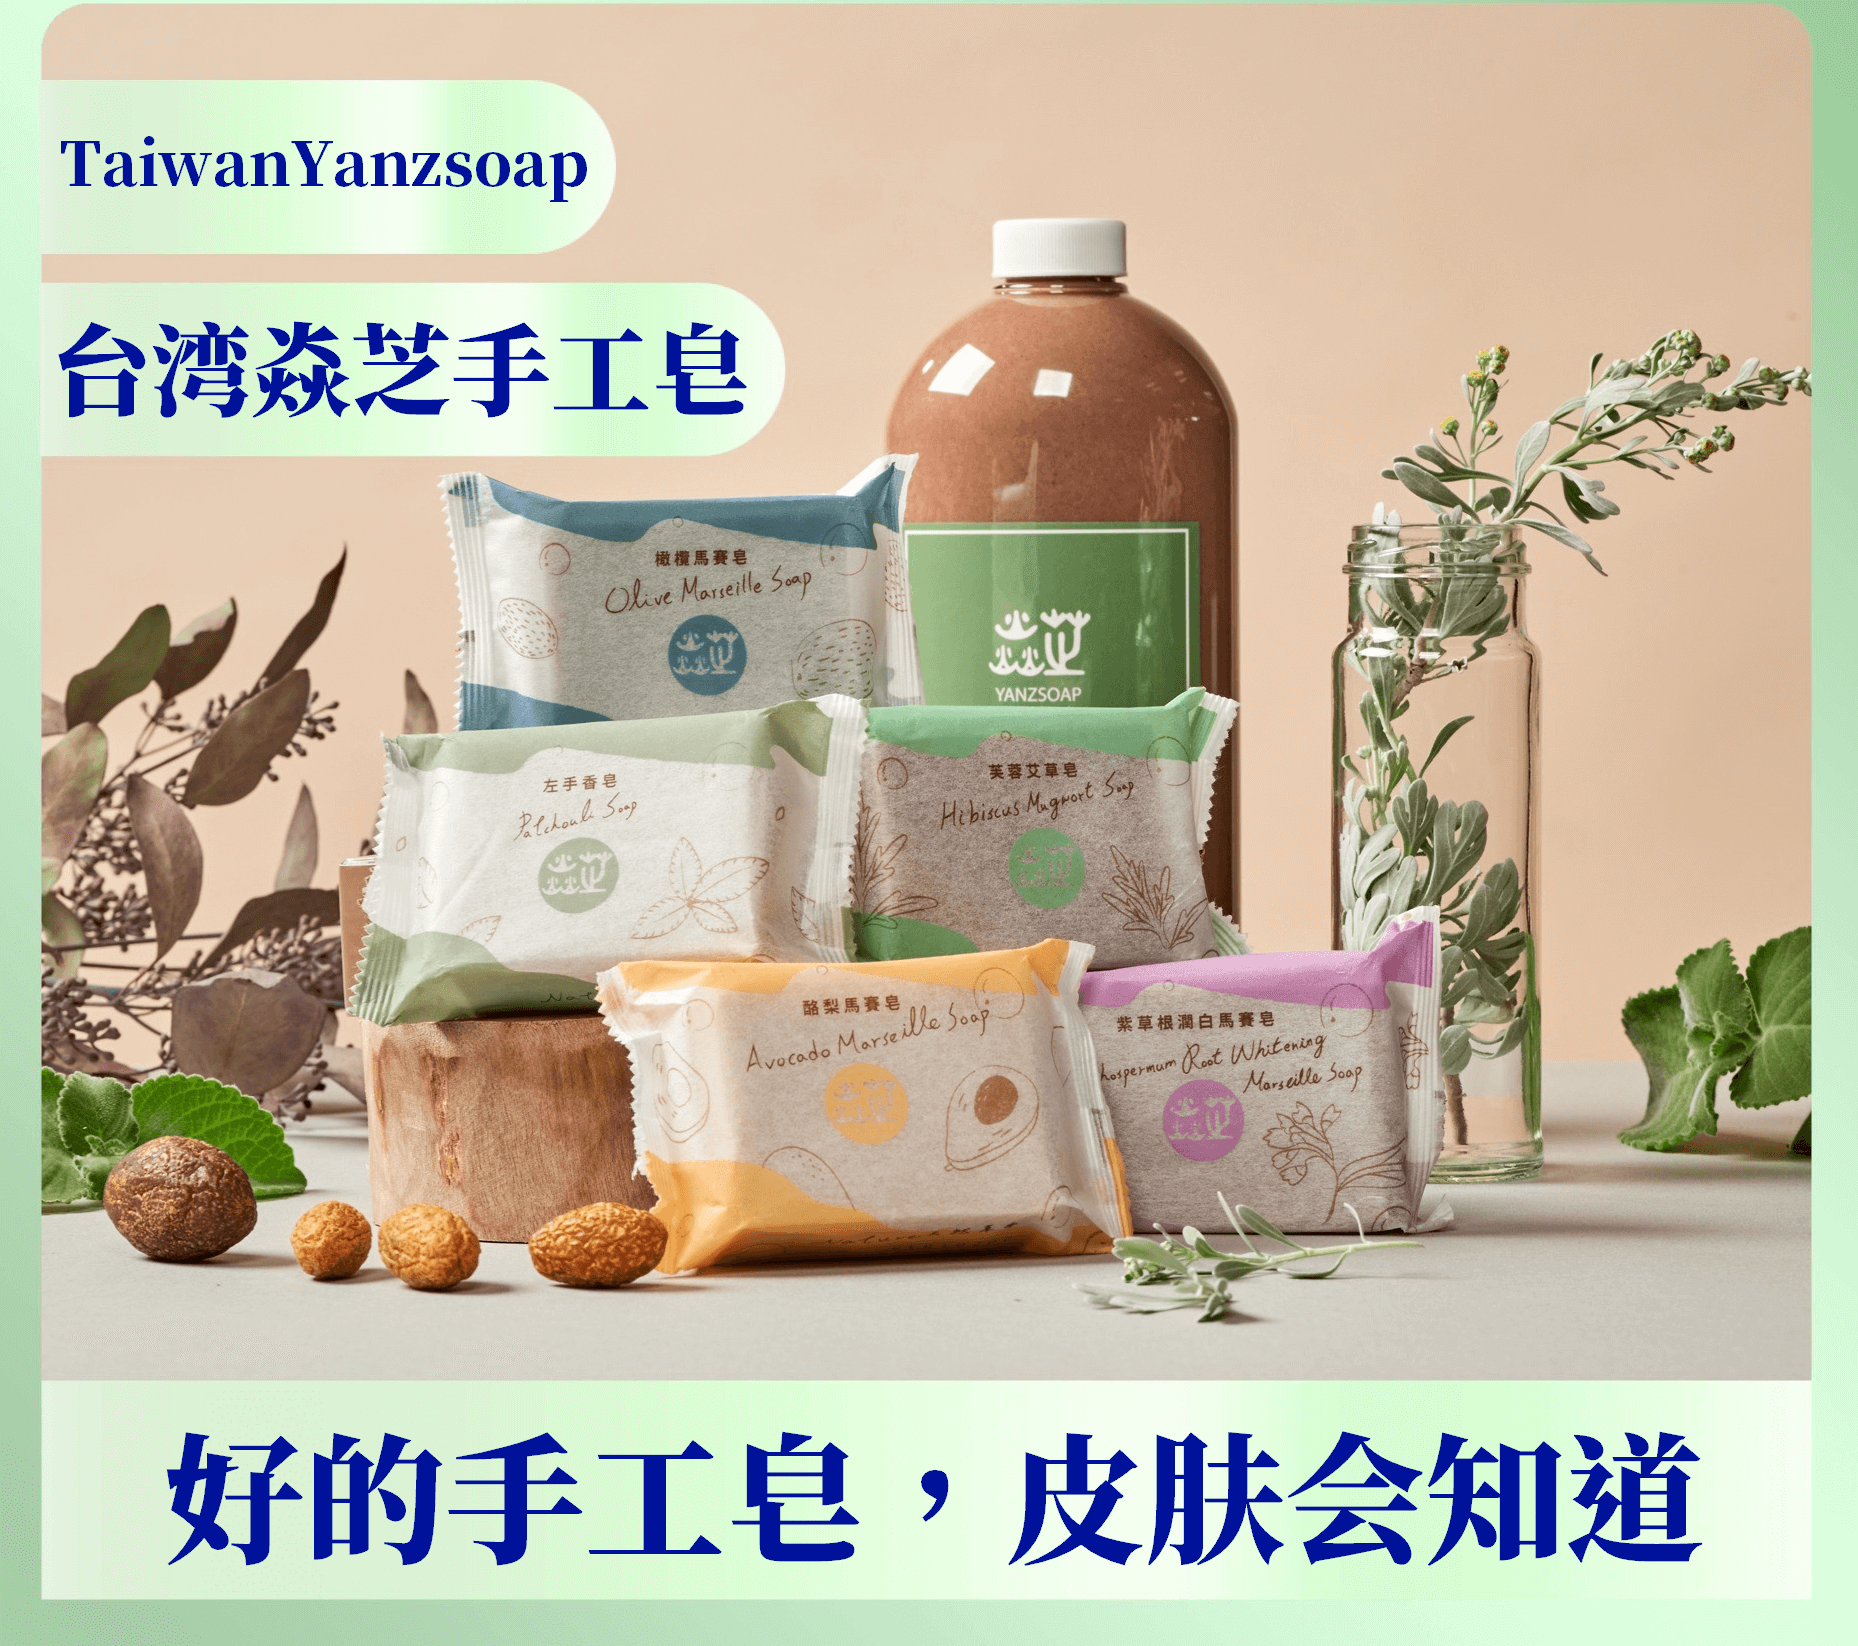 No.1 best seller in Taiwan-Rash/Eczema/Psoriasis【YanzSoap-Hibiscus Mugwort Soap 120g】Wash from head to toe 3in1/Sweet almond oil/Soothe emotions/Help sleep/Suitable for the elderly and babies